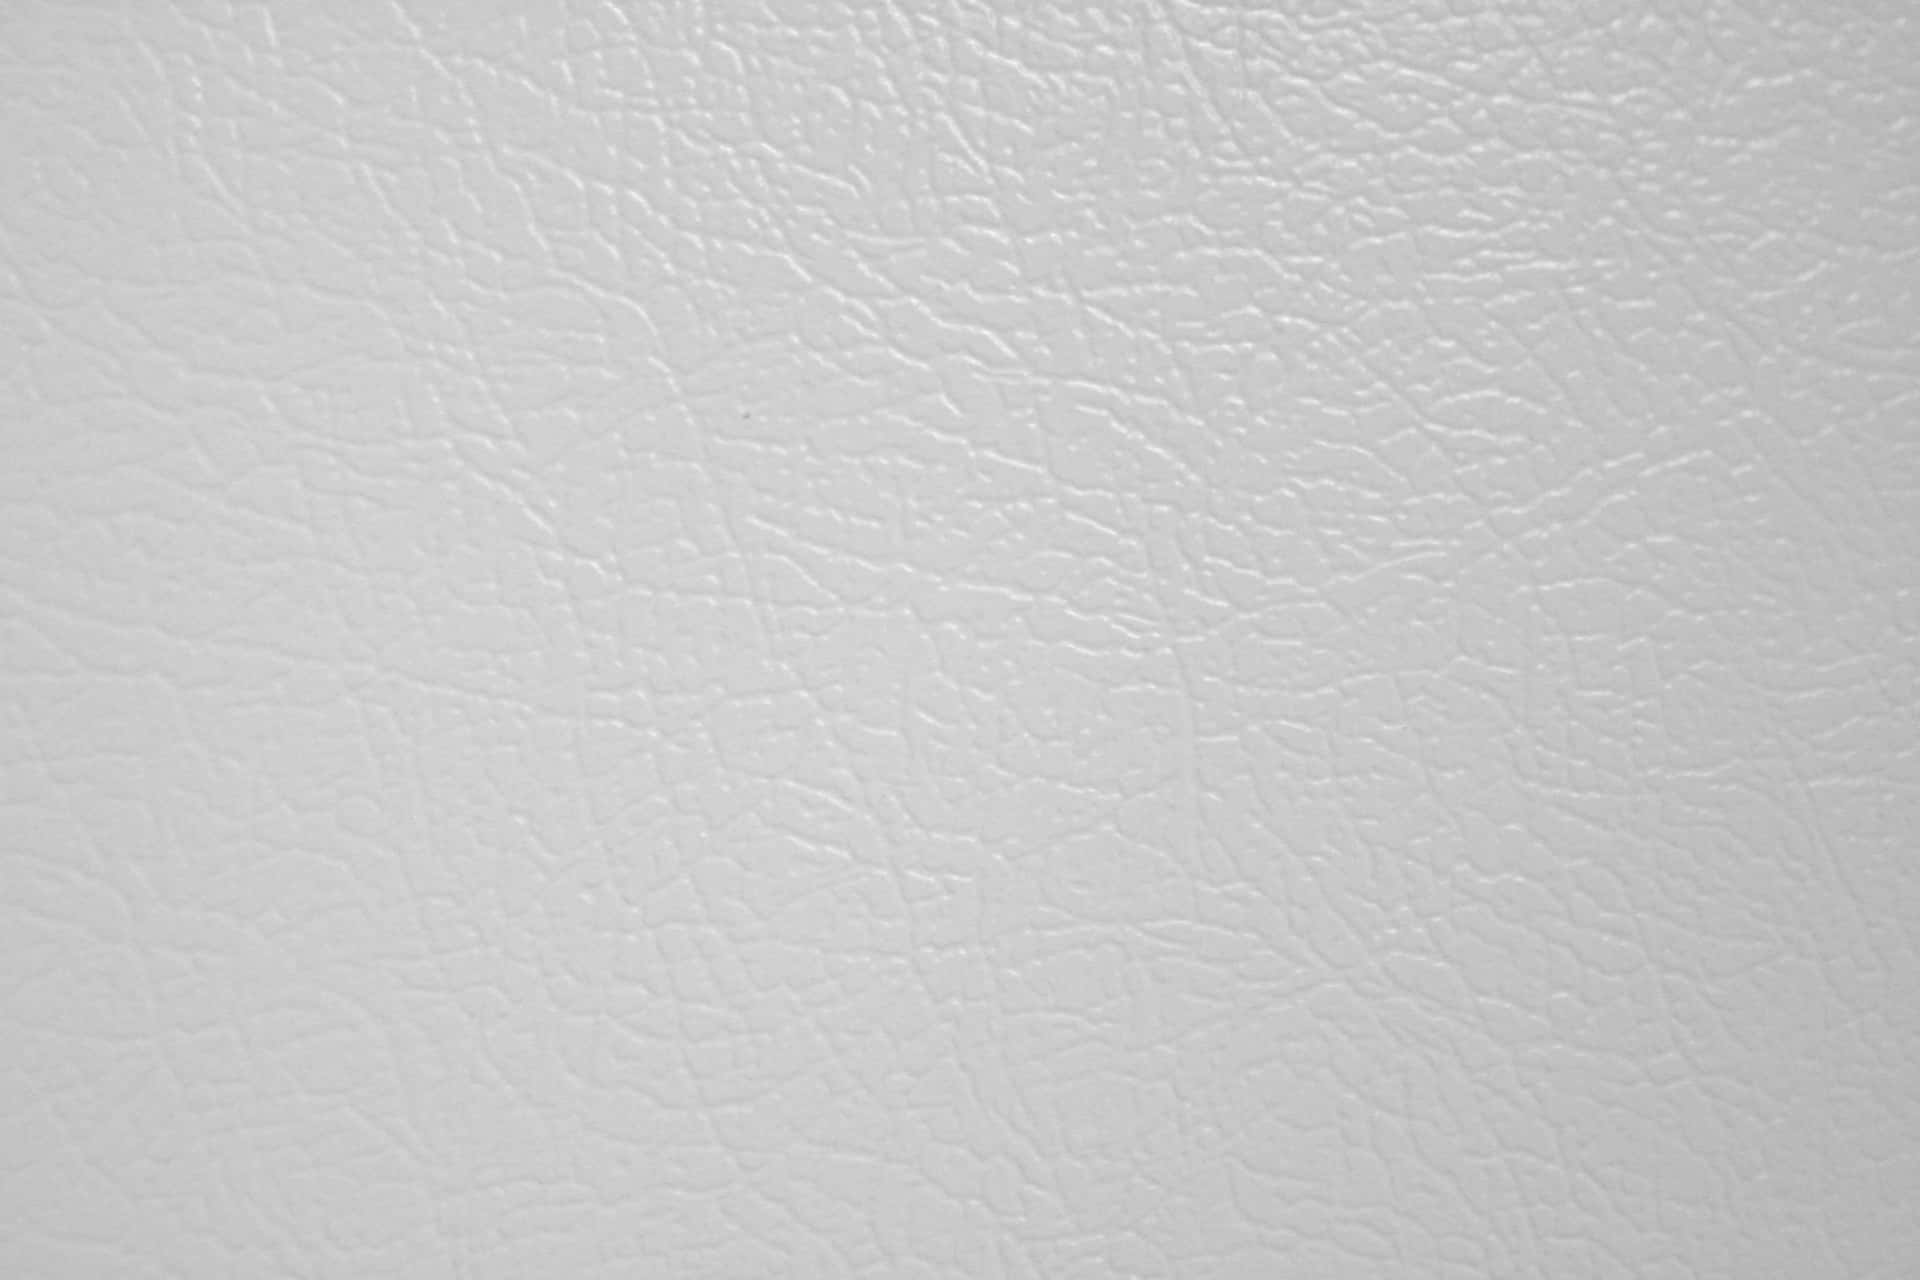 Sleek and Shiny White Leather Texture Wallpaper